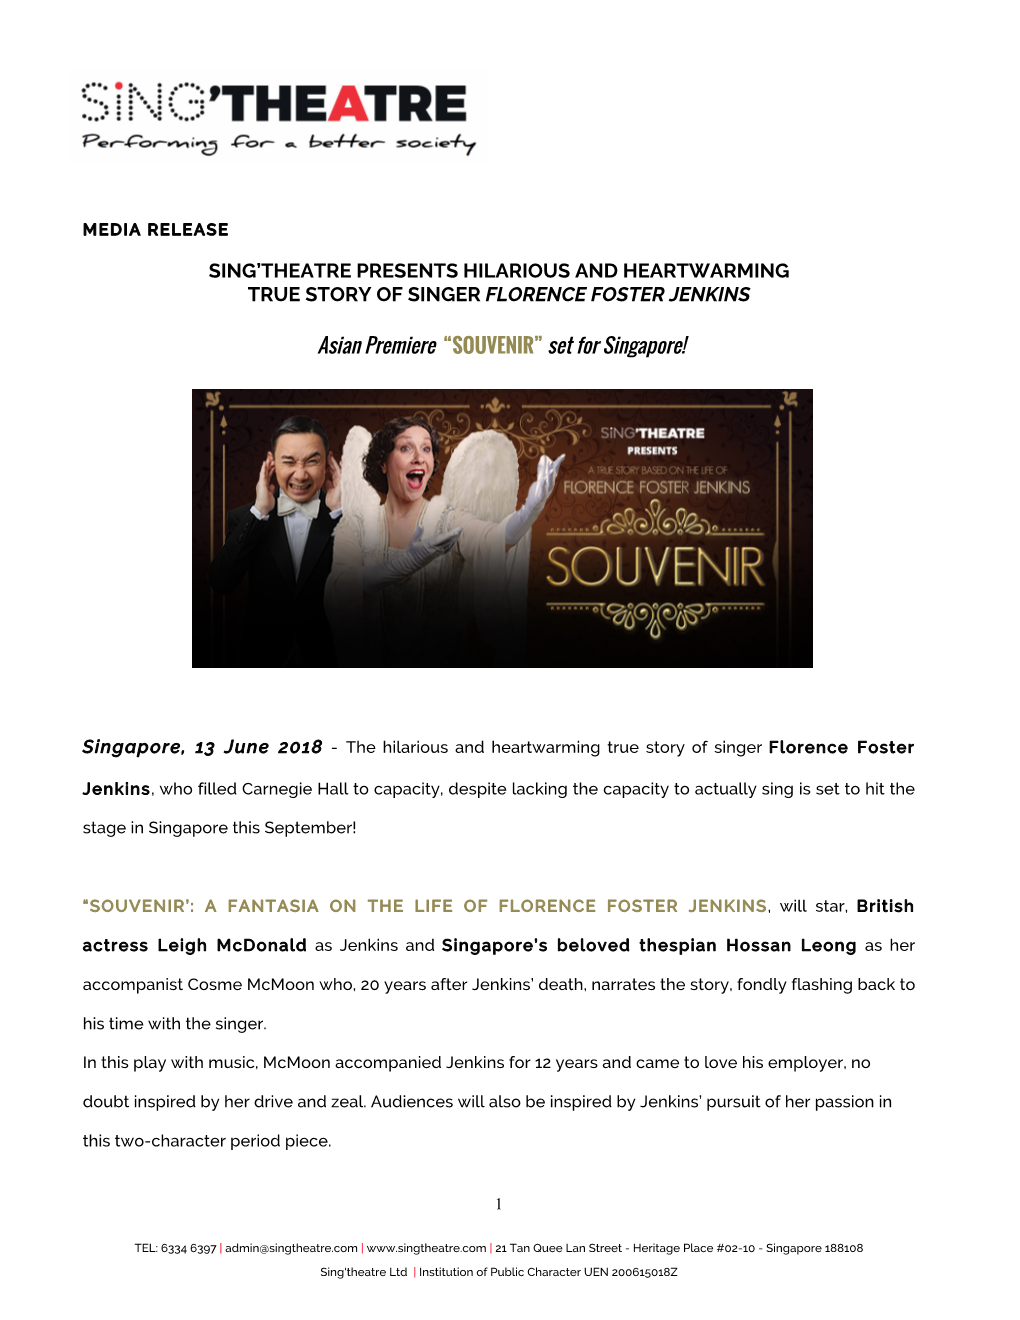 SING'theatre PRESENTS HILARIOUS and HEARTWARMING TRUE STORY of SINGER FLORENCE FOSTER JENKINS Asian Premiere “SOUVENIR”